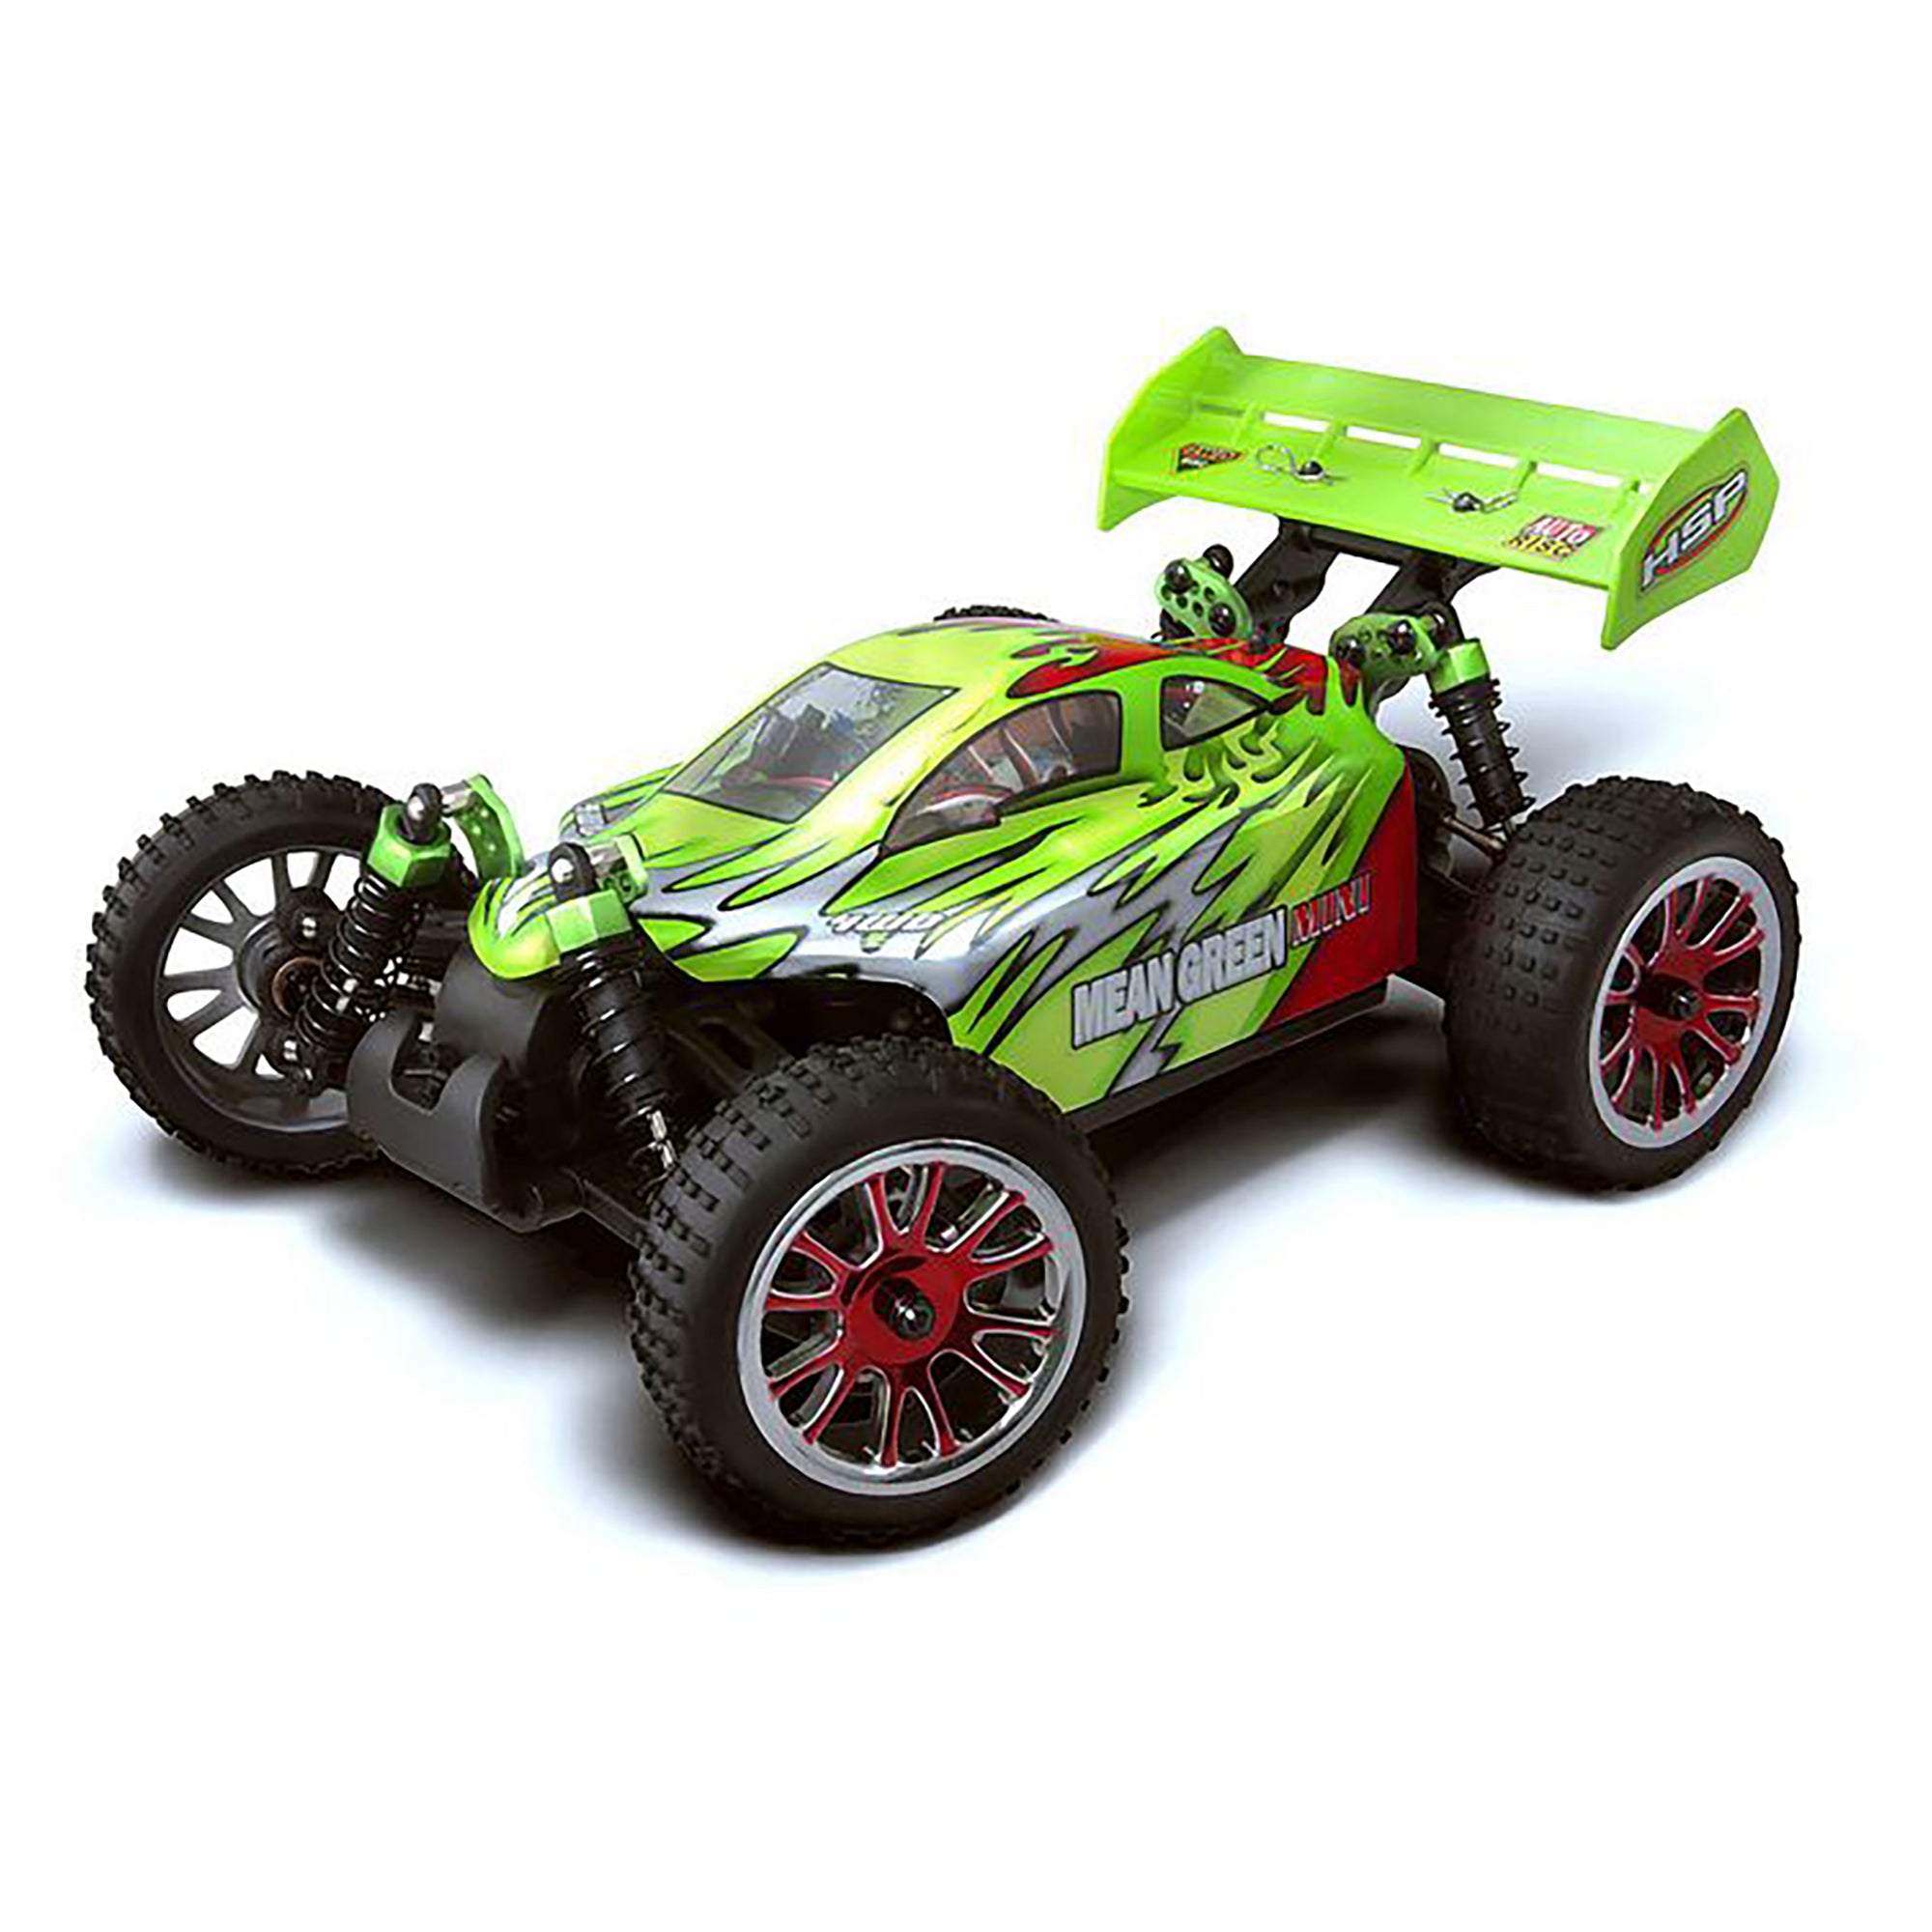 HSP Racing 94185-10707 Mini 2.4Ghz Electric 4WD Off Road RTR 1/16 Scale RC Buggy